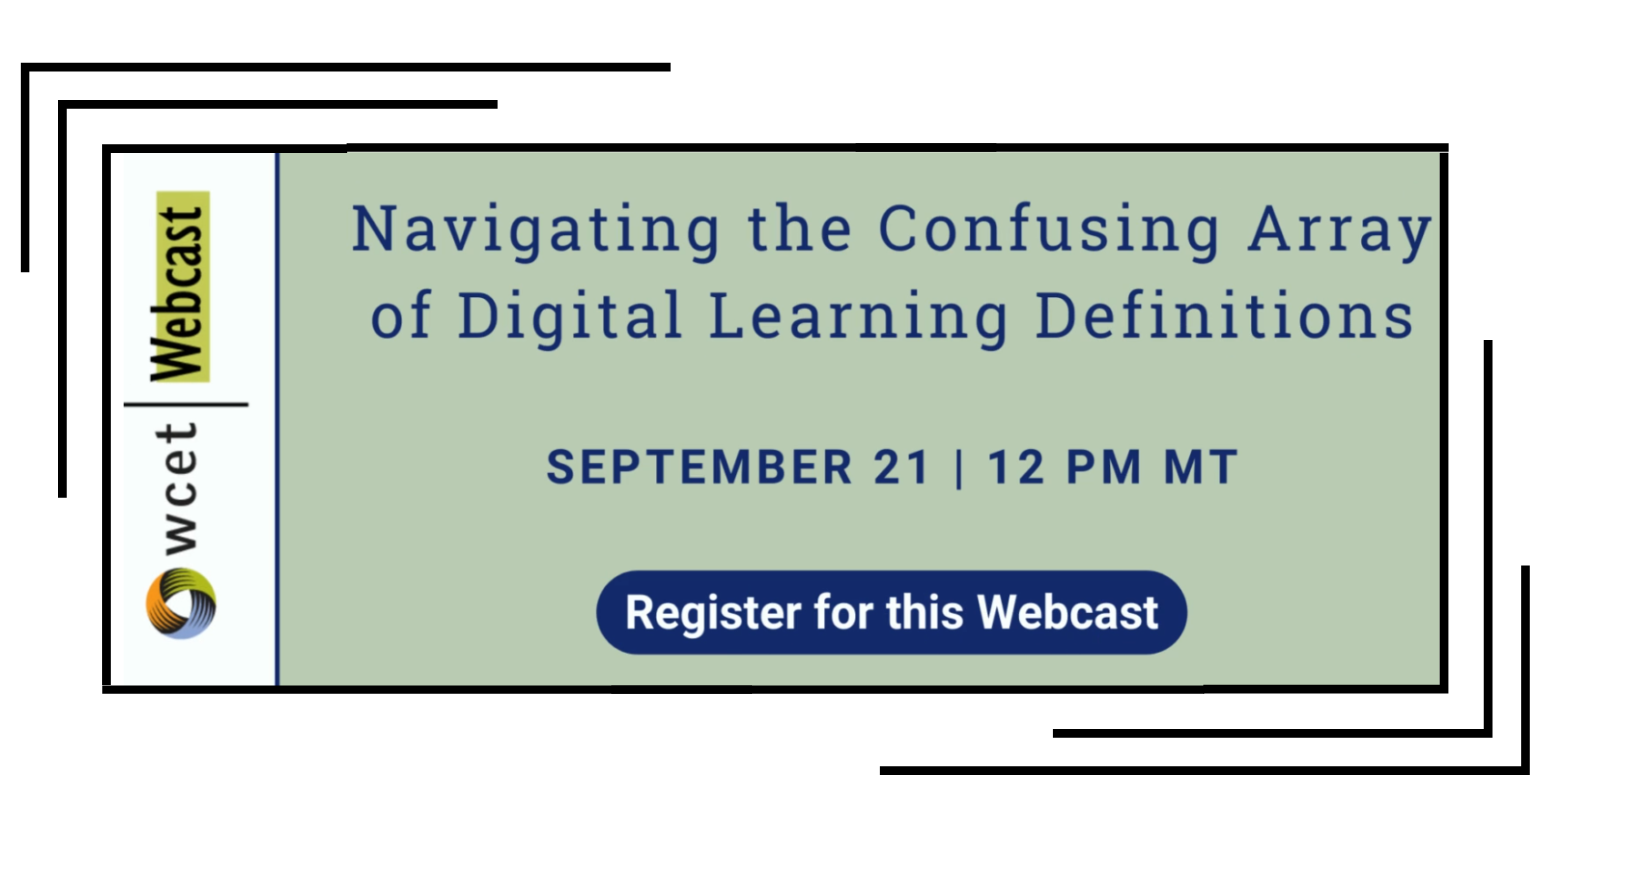 ad for wcet webcast - Navigating the Confusing Array of Digital Learning Definitions